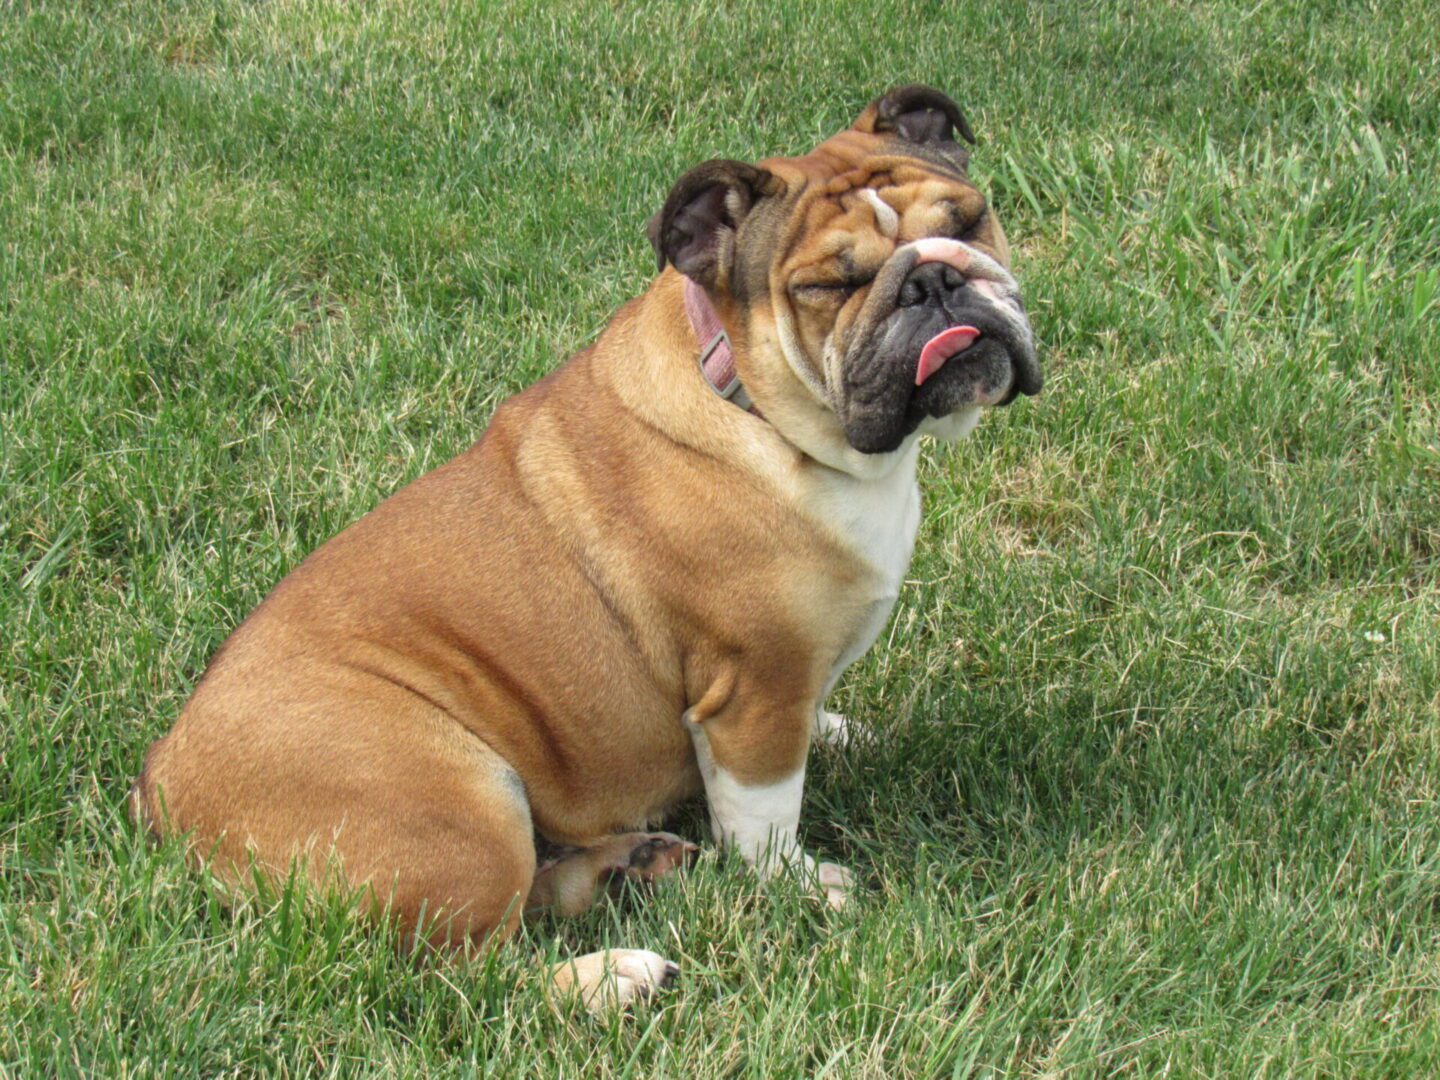 A Light Brown Color Bull Dog Sitting on a Lawn